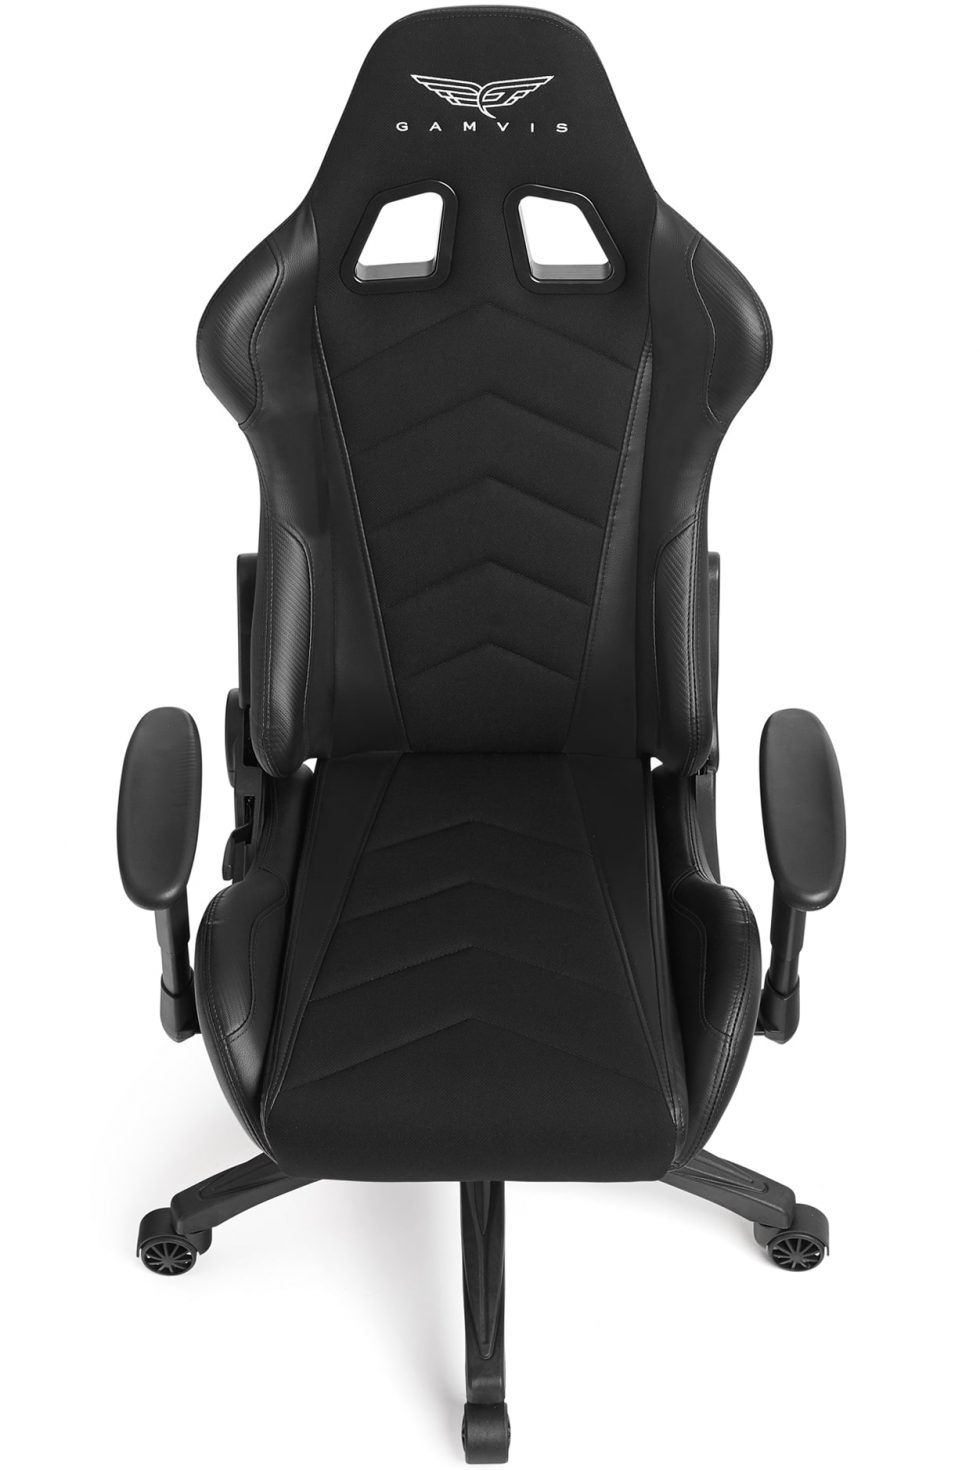 Gamvis EXPERT Fabric Gaming Chair - Black